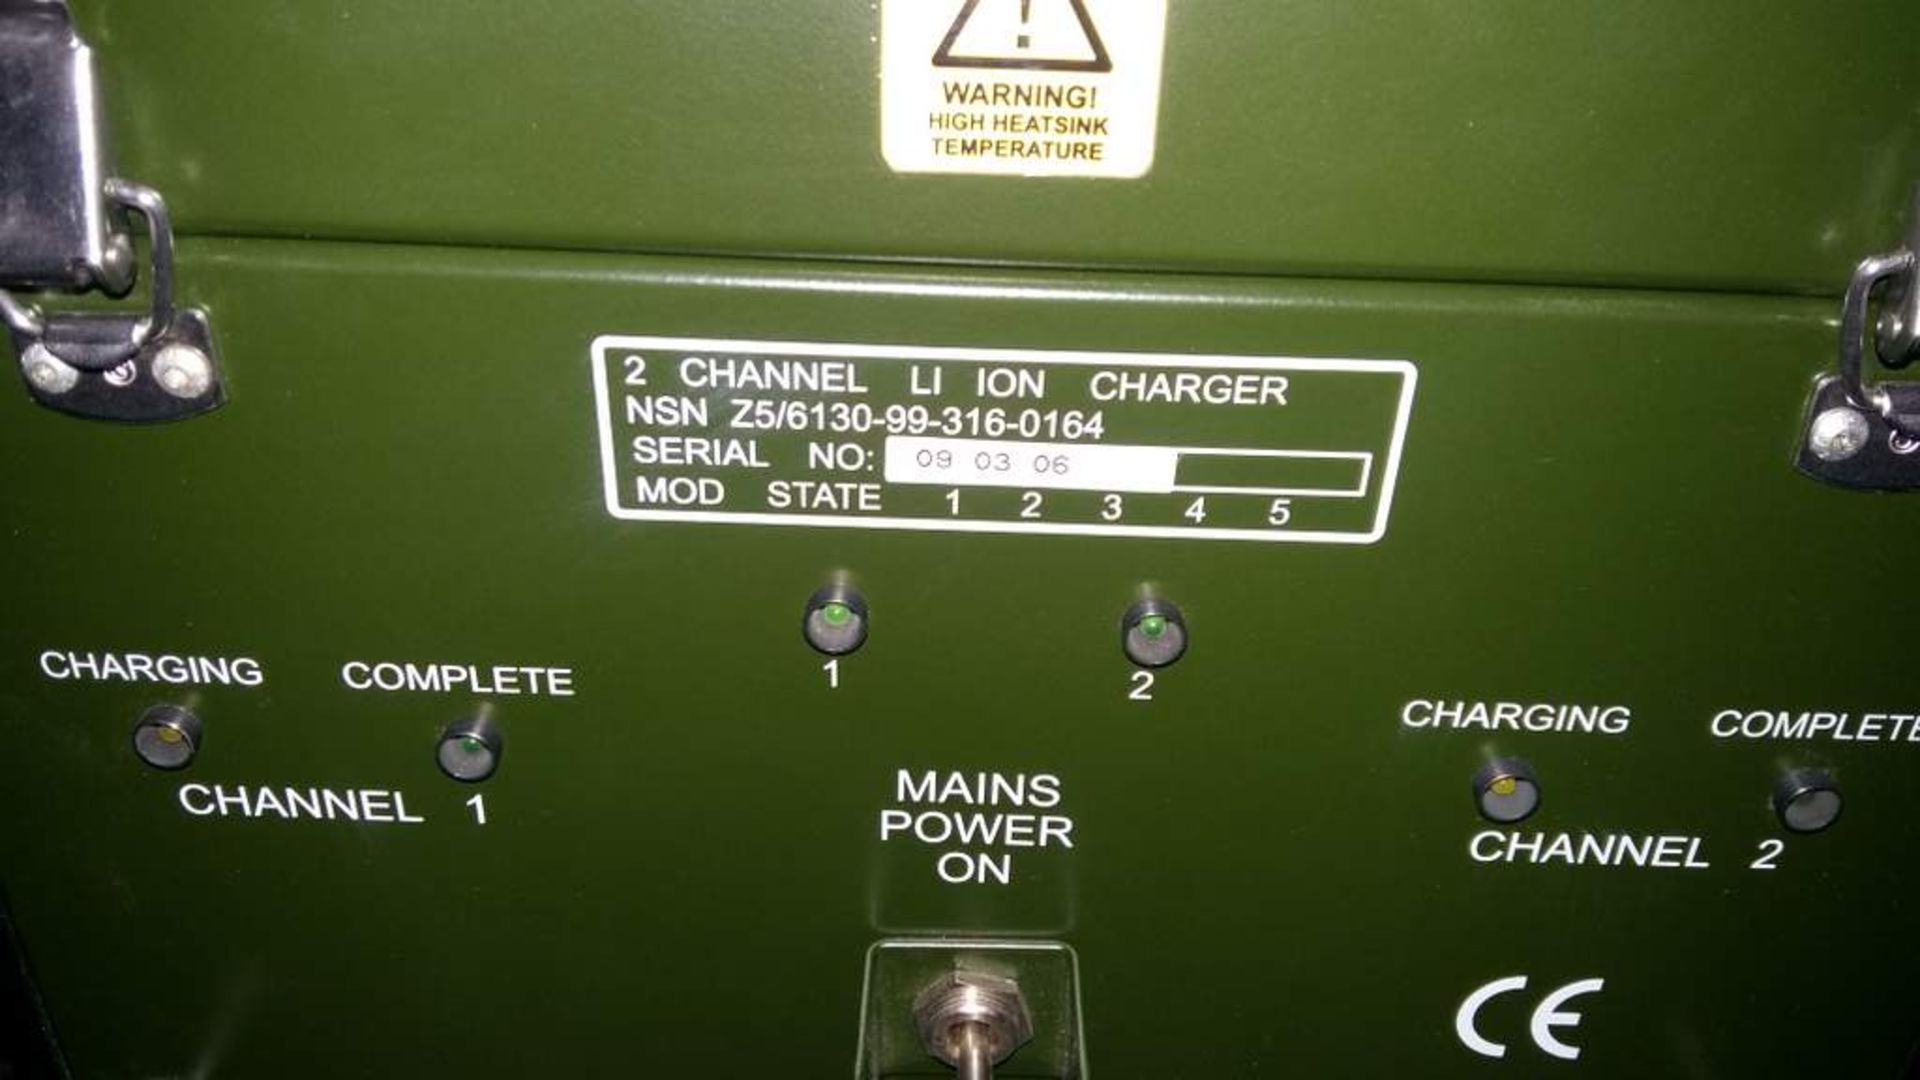 2 Channel Li-ION charger NSN 6130-99-316-0164 - Image 2 of 4